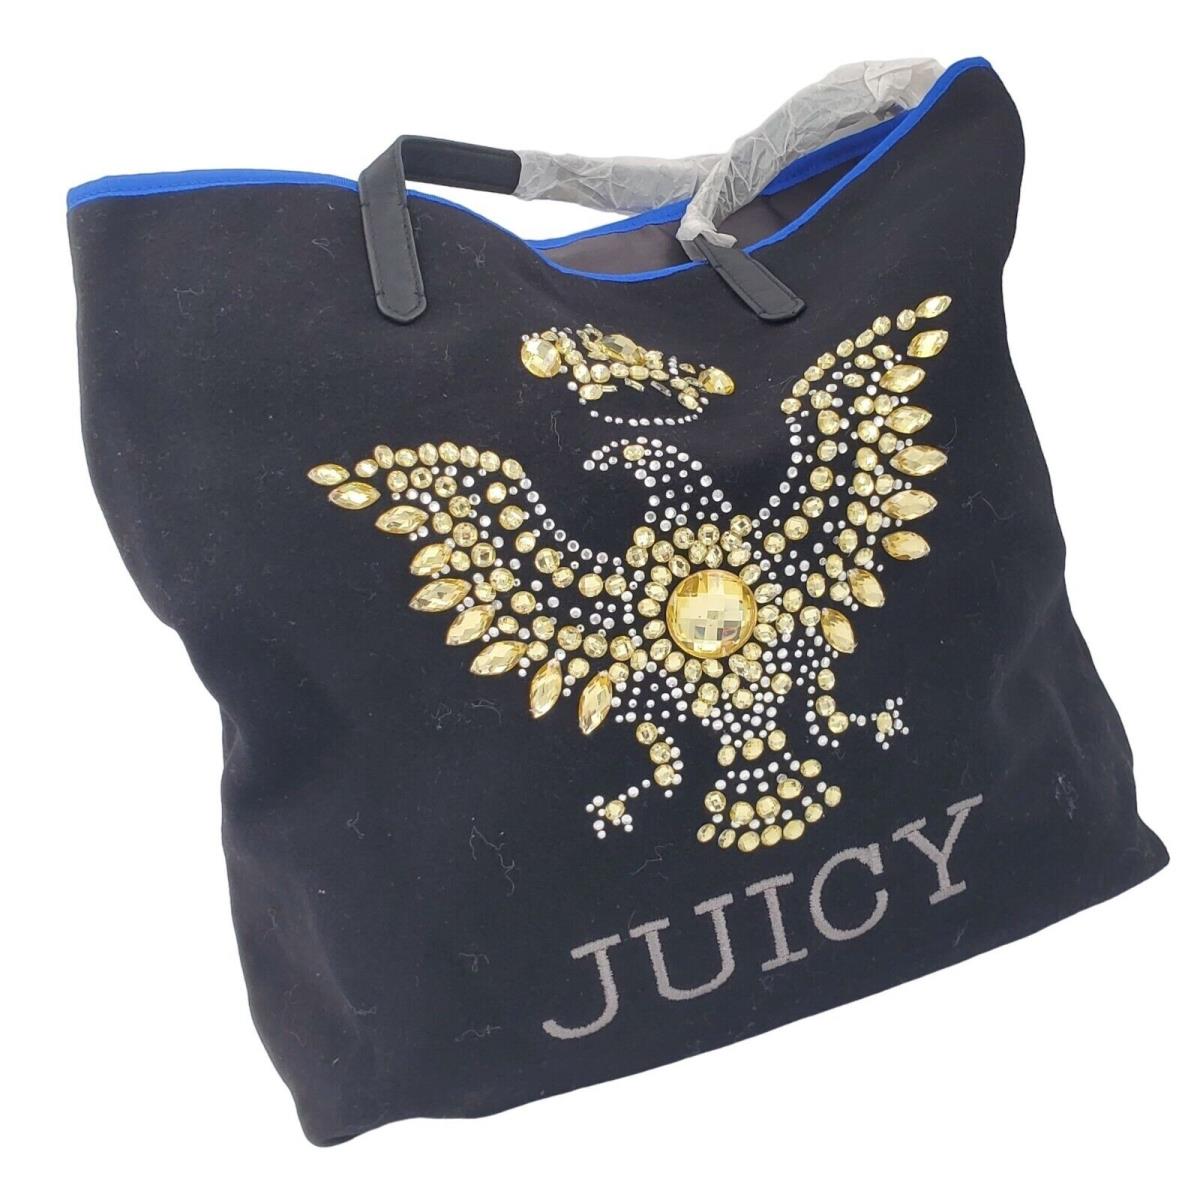 Juicy Couture | Bags | Baby Blue Suede Juicy Couture Purse | Poshmark